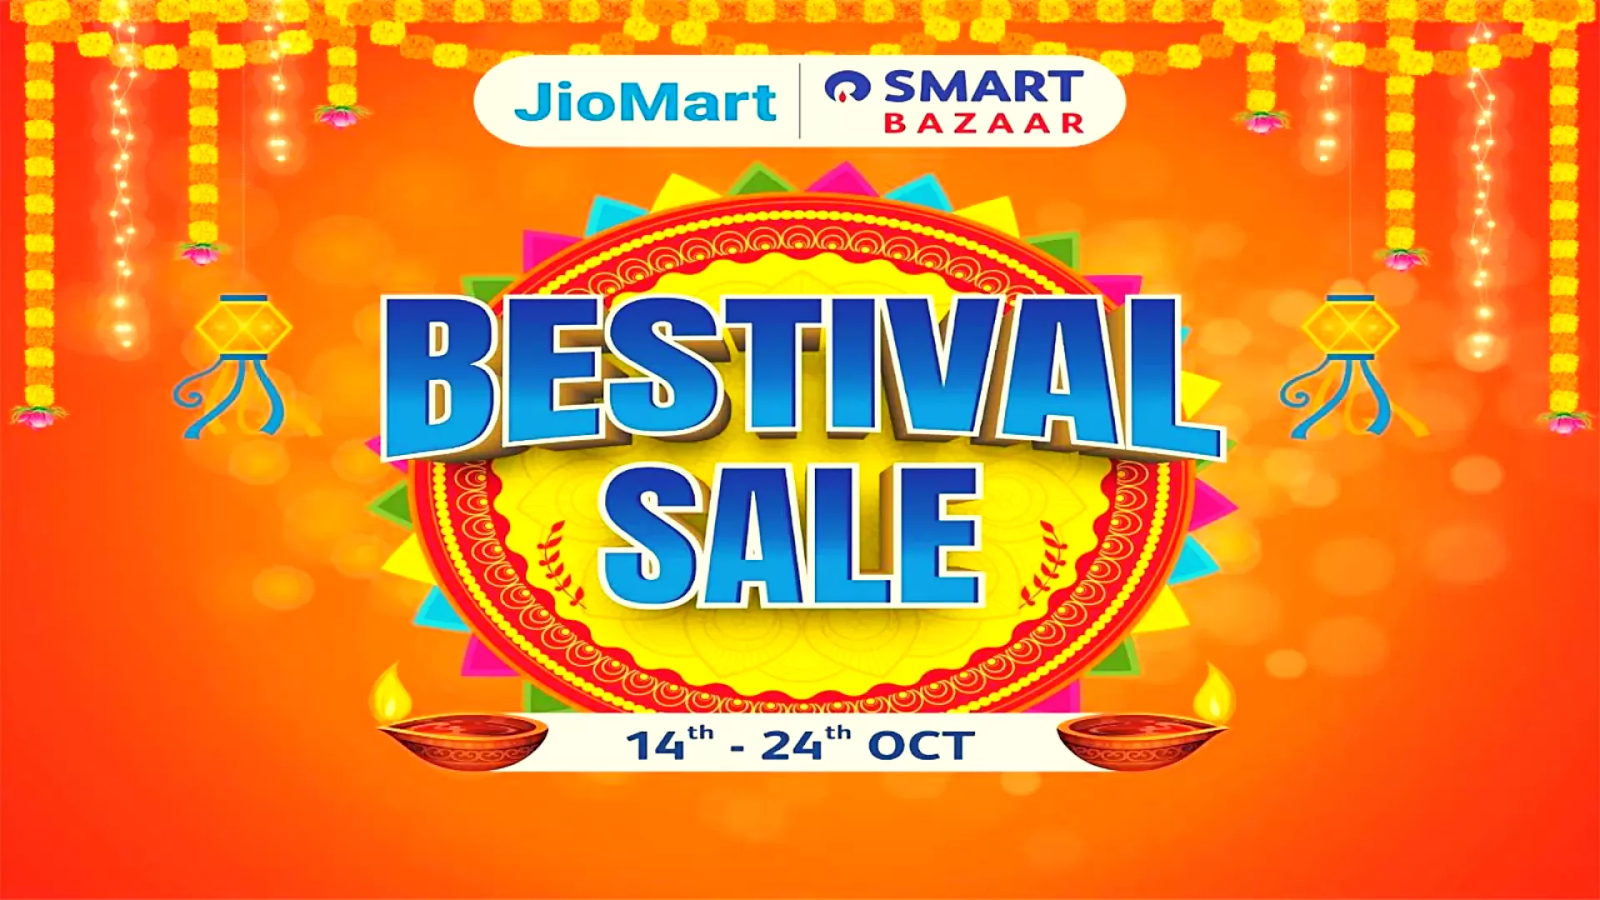 The JioMart advertising commercial of its Bestival sale